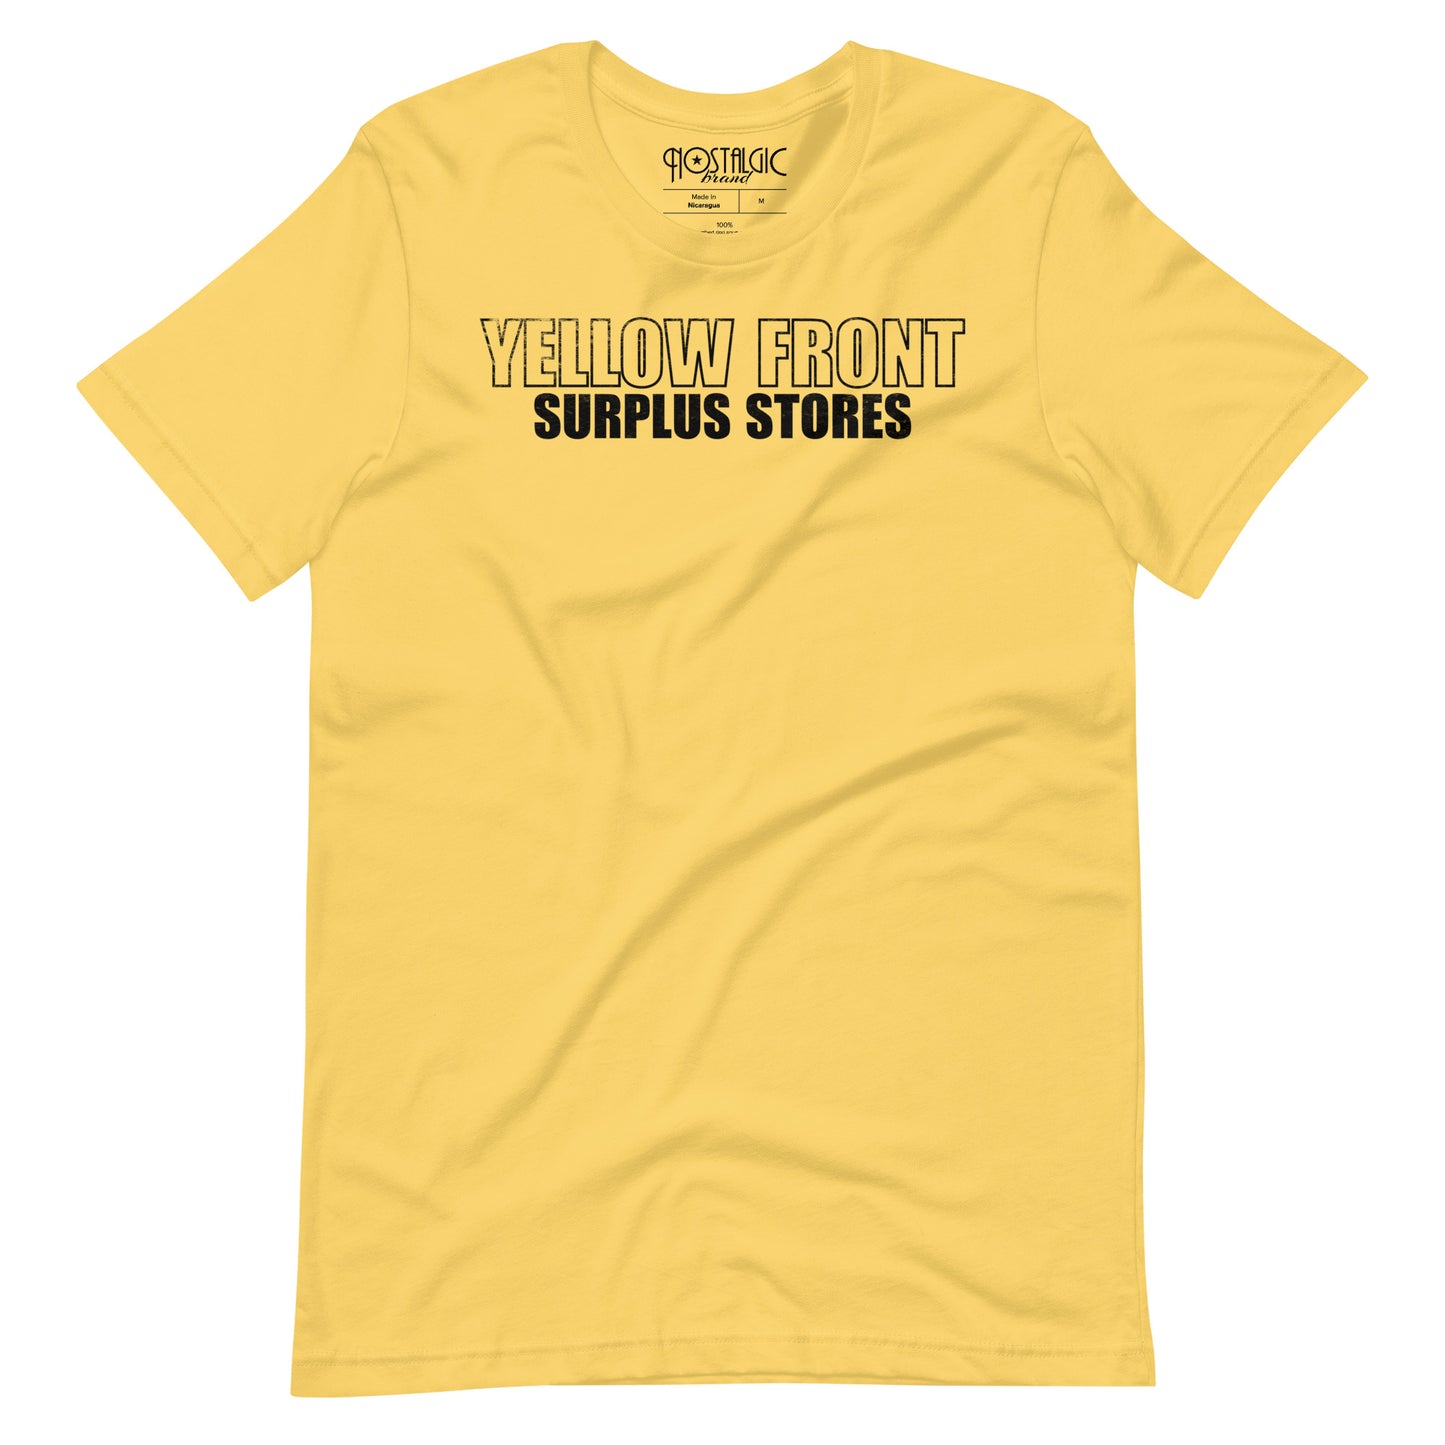 YELLOW FRONT SURPLUS STORES